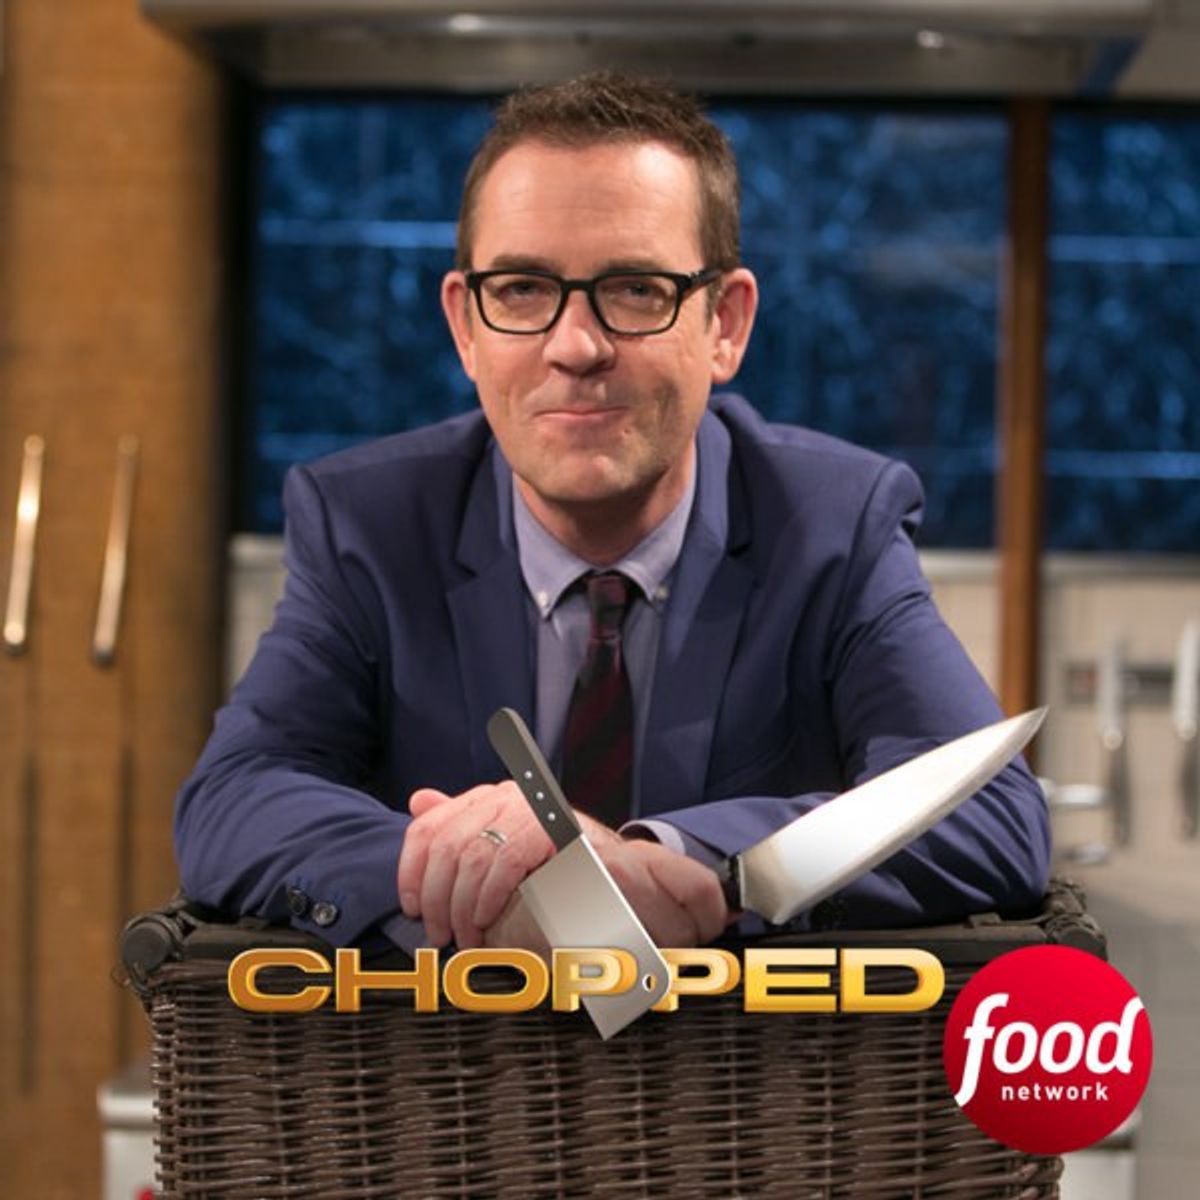 The 13 Things That Are Guaranteed To Be Seen On An Episode of Chopped